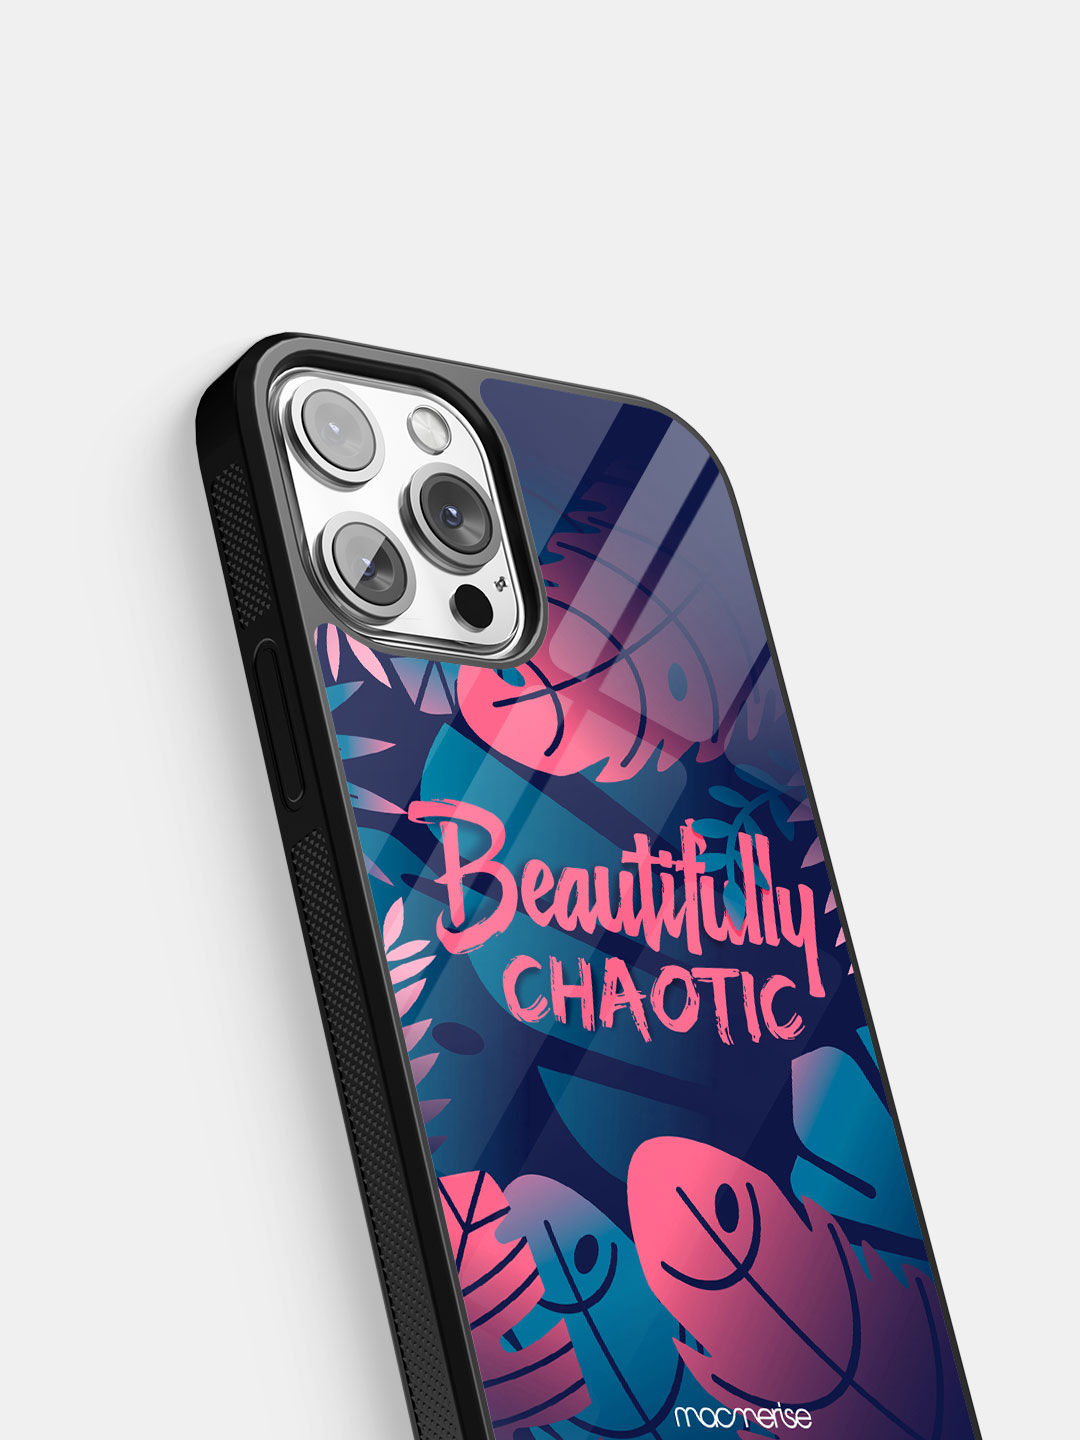 Beautifully Chaotic - Glass Case For iPhone 13 Pro Max